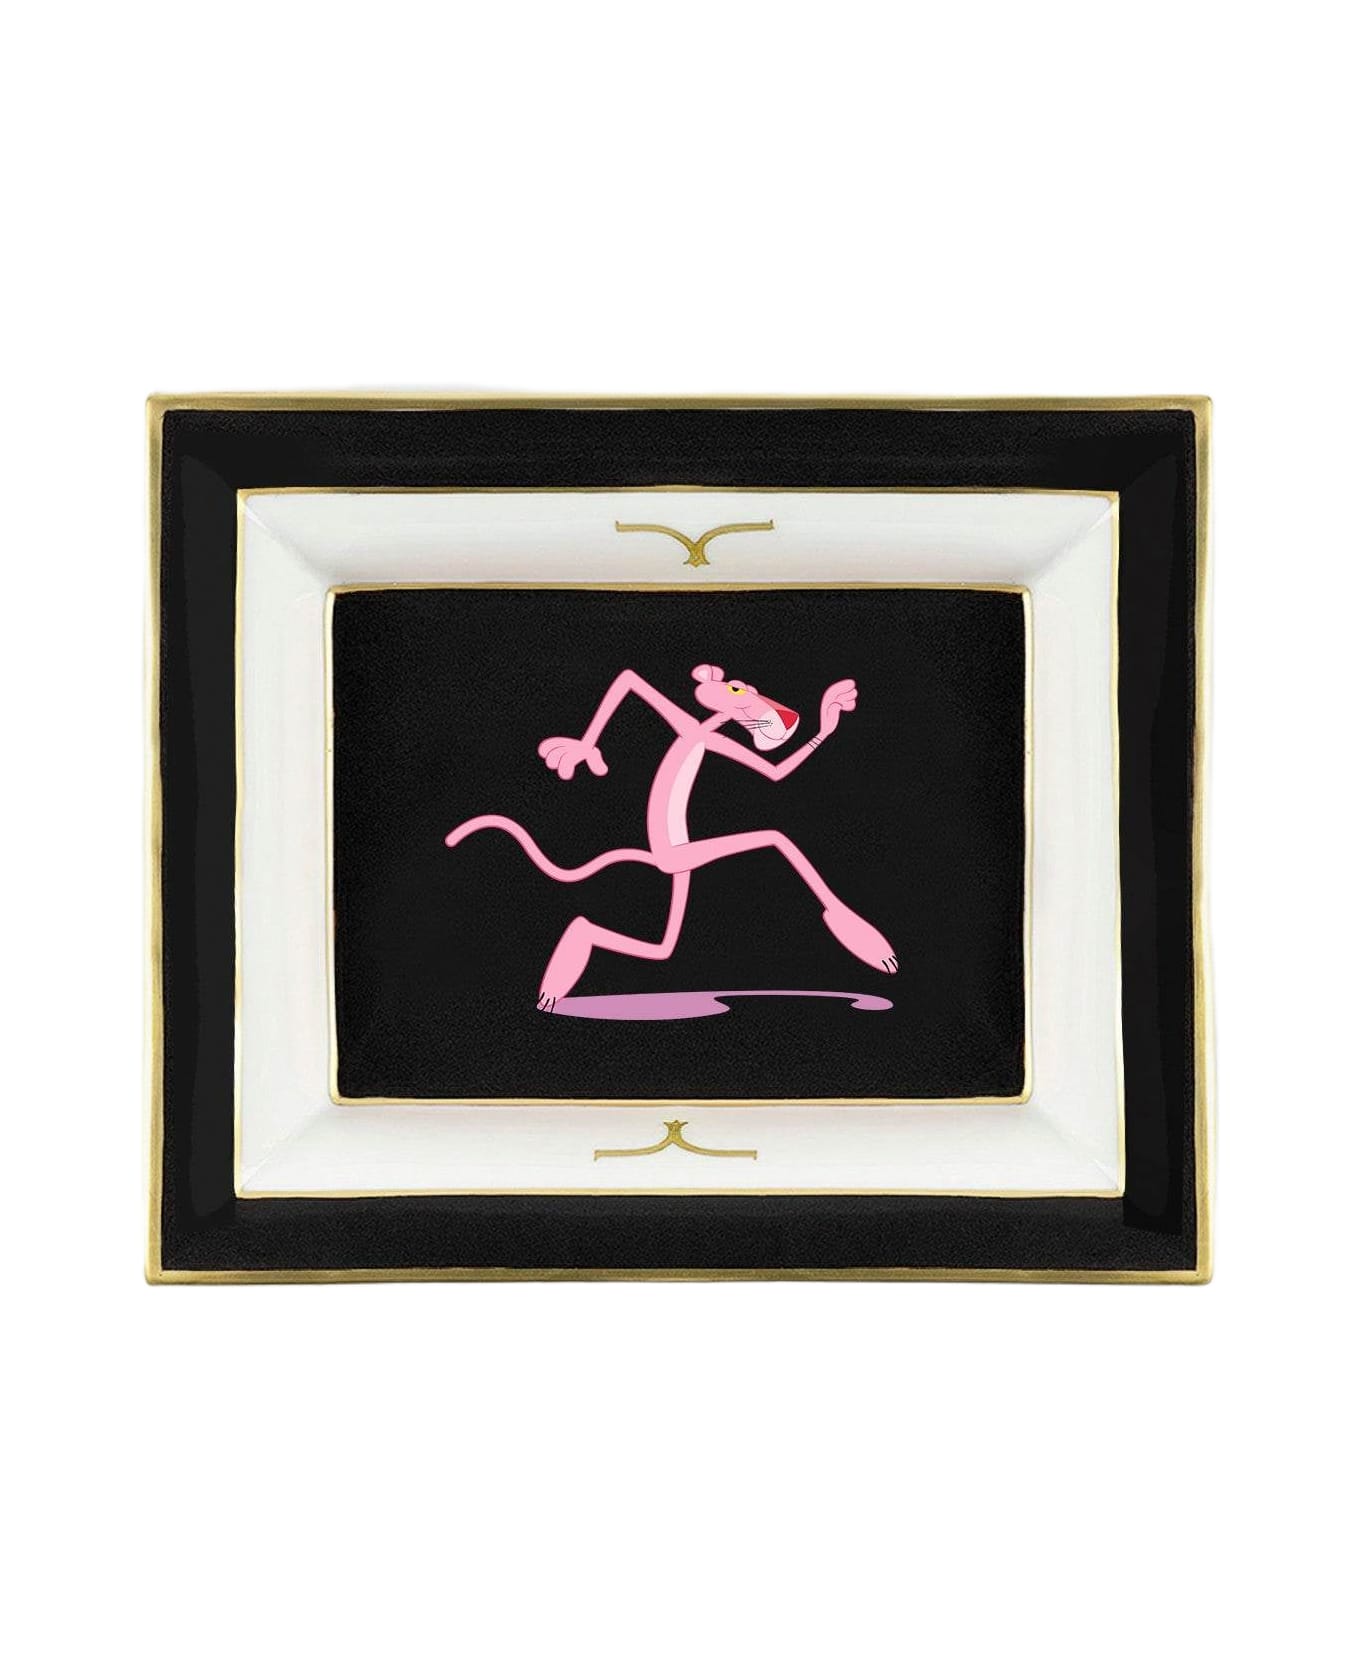 Larusmiani Pocket Emptier 'pink Panther' Tray - NERO CORRE